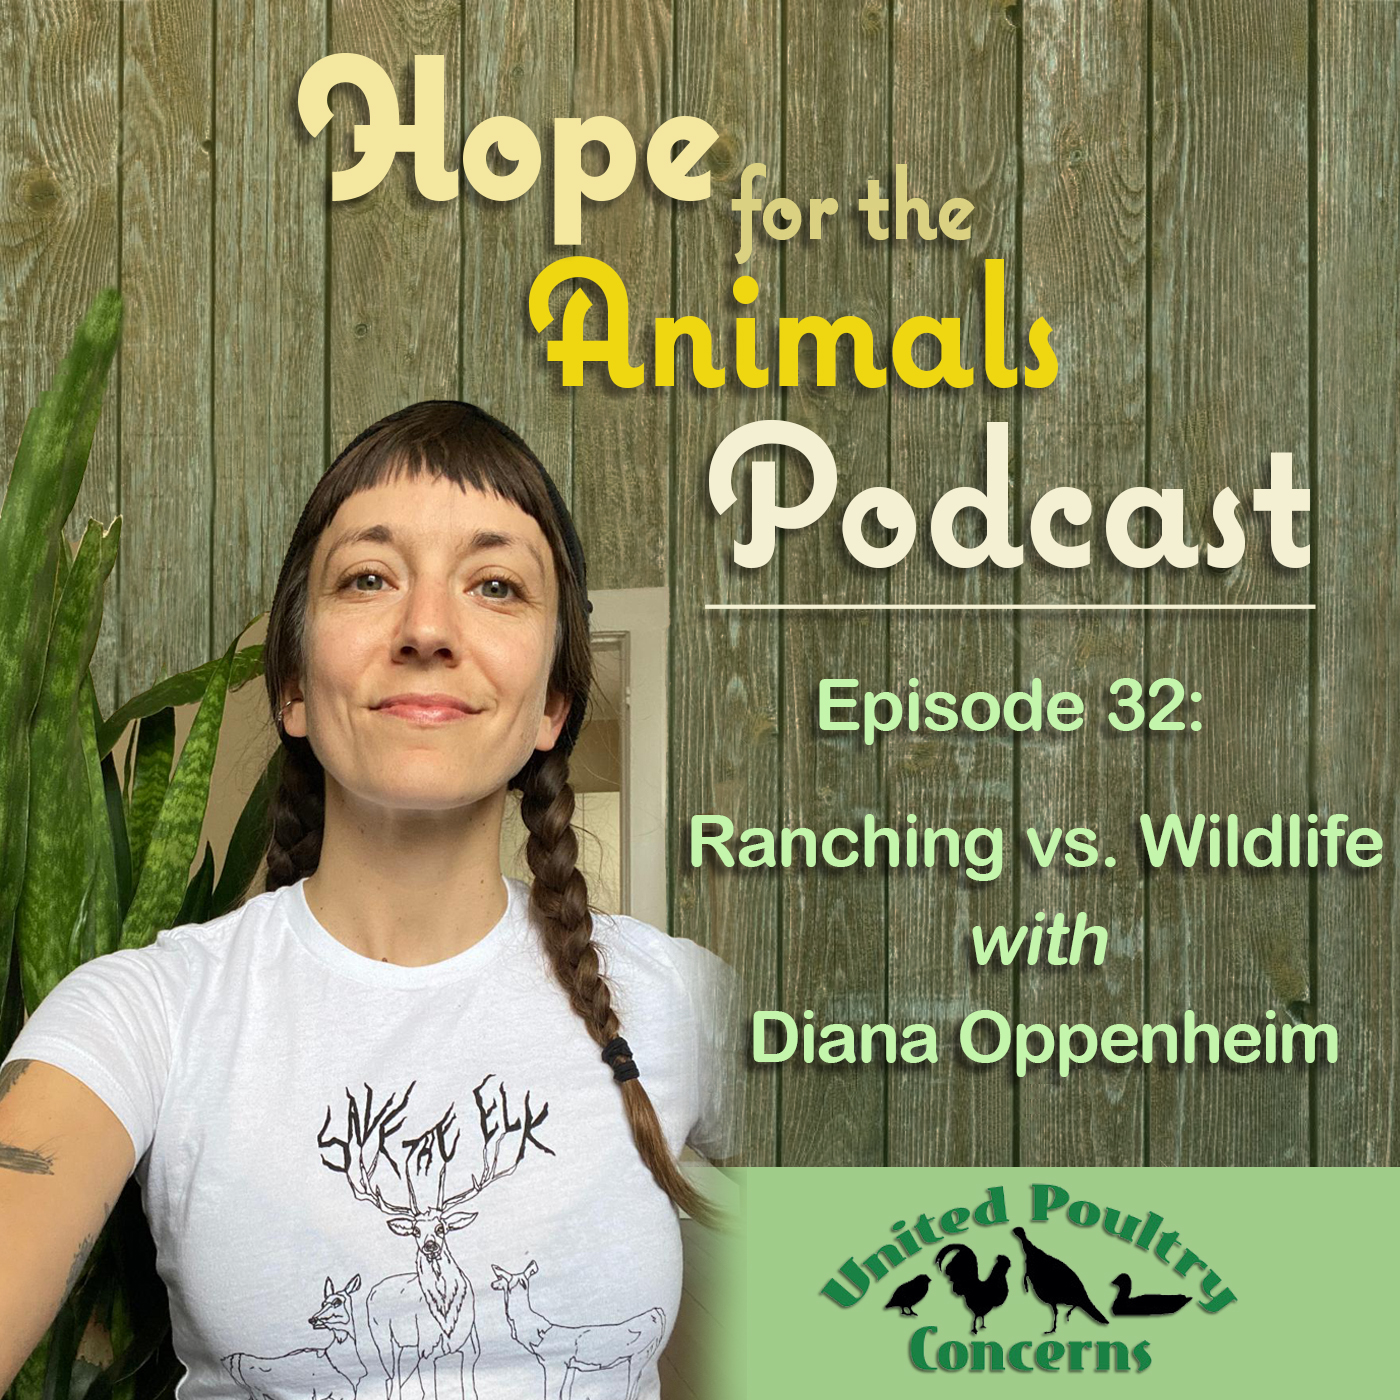 Episode 32: Ranching vs. Wildlife with Diana Oppenheim